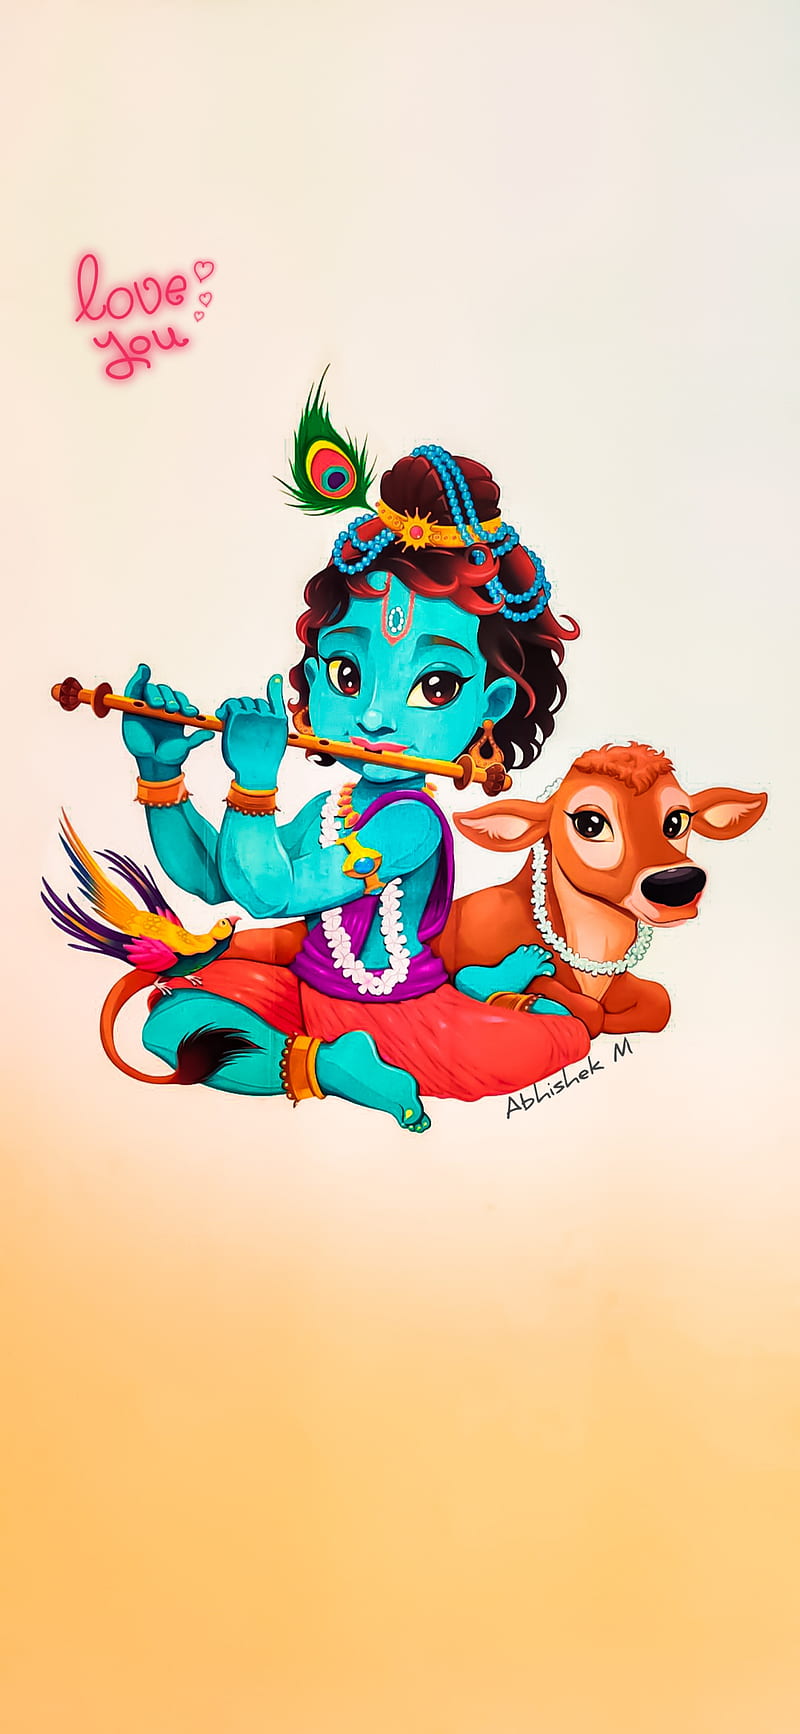 Lord Bal Krishna with colorful background wallpaper  God Bal Krishna  poster design for wallpaper Stock Photo  Alamy